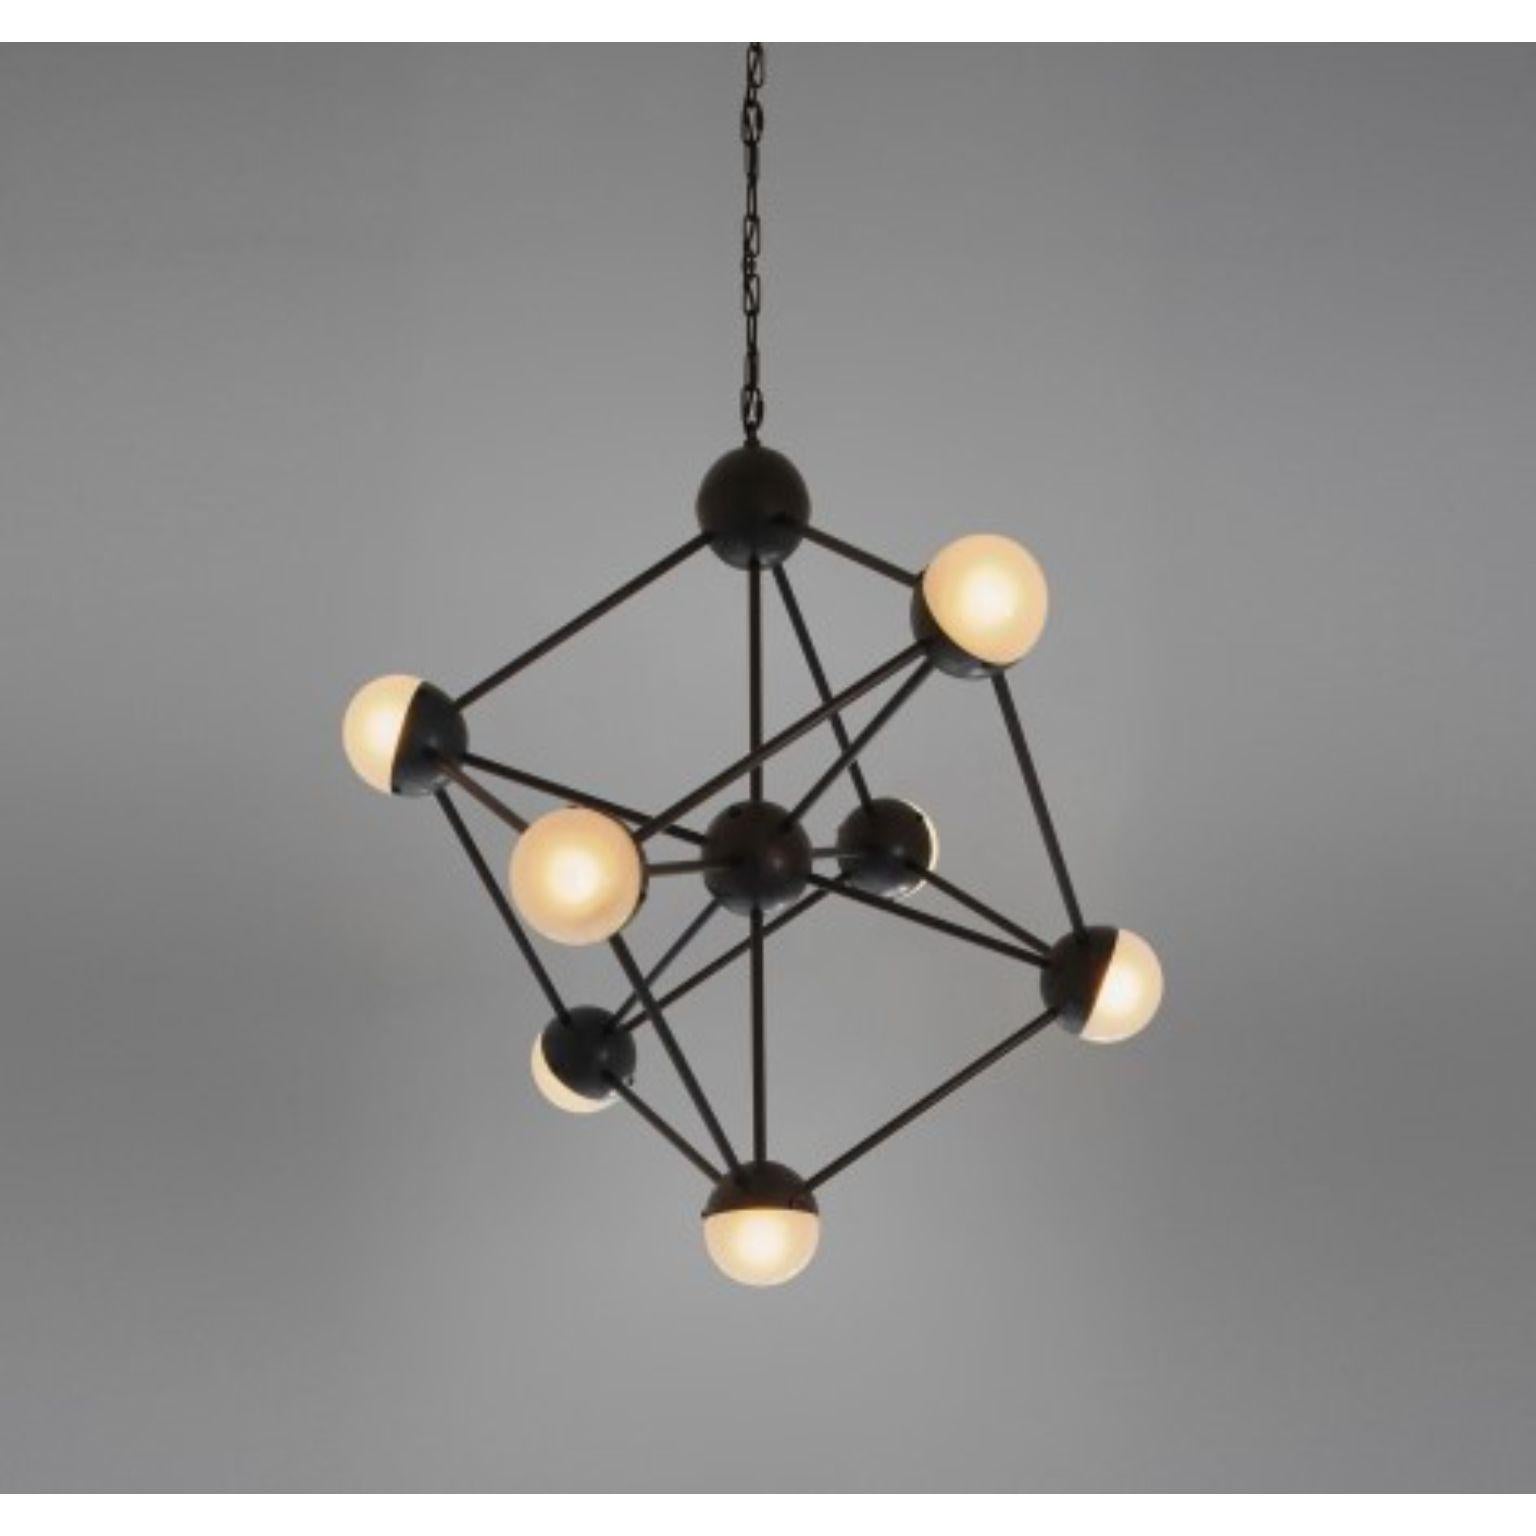 Molecule chandelier by Schwung
Dimensions: D76.4 x H 117.4 cm
Materials: Brass, Opal glass
Weight: 11.8 kg

Finishes available: Black gunmetal, polished nickel, brass
Other sizes available.

 Schwung is a german word, and loosely defined,